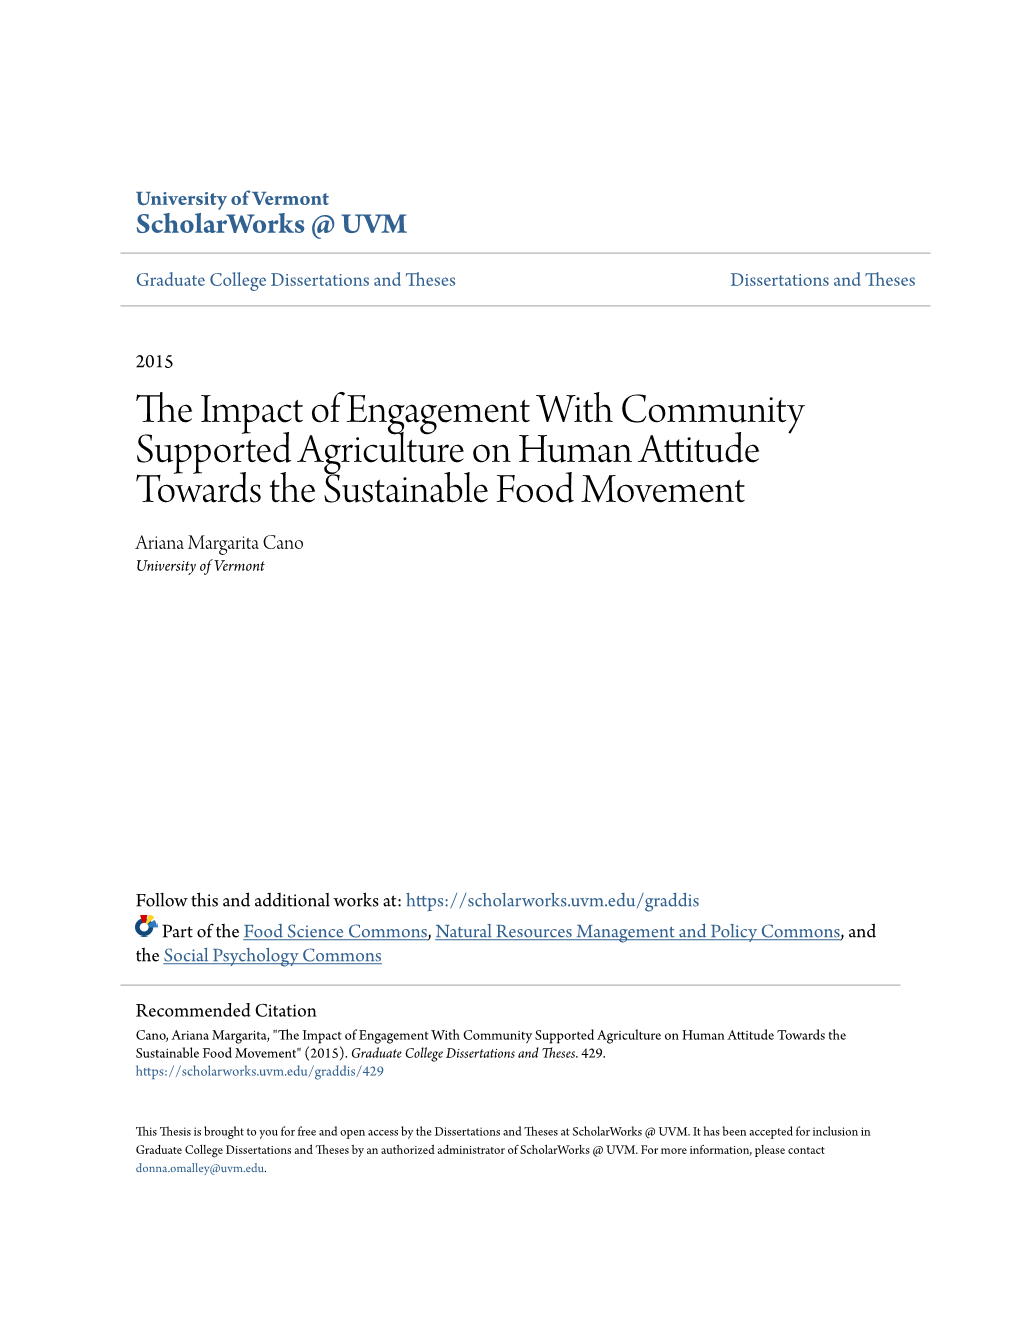 The Impact of Engagement with Community Supported Agriculture on Human Attitude Towards the Sustainable Food Movement